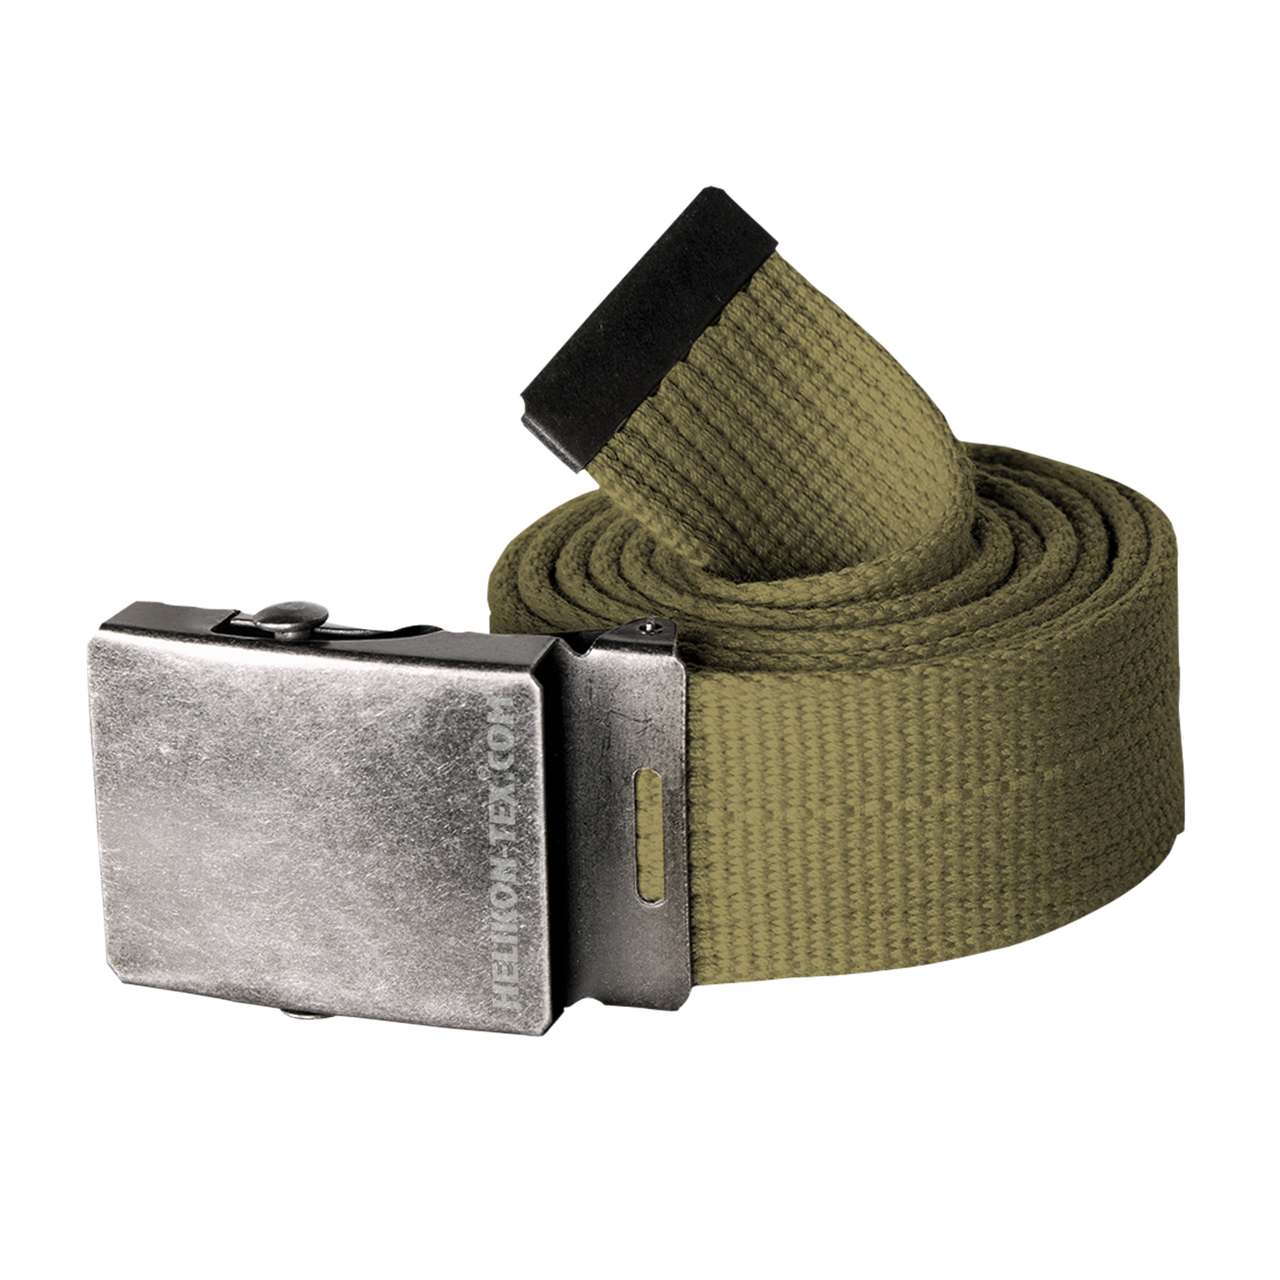 COTTON CANVAS BELT - WITH METAL BUCKLE - Helikon-Tex® - OLIVE GREEN